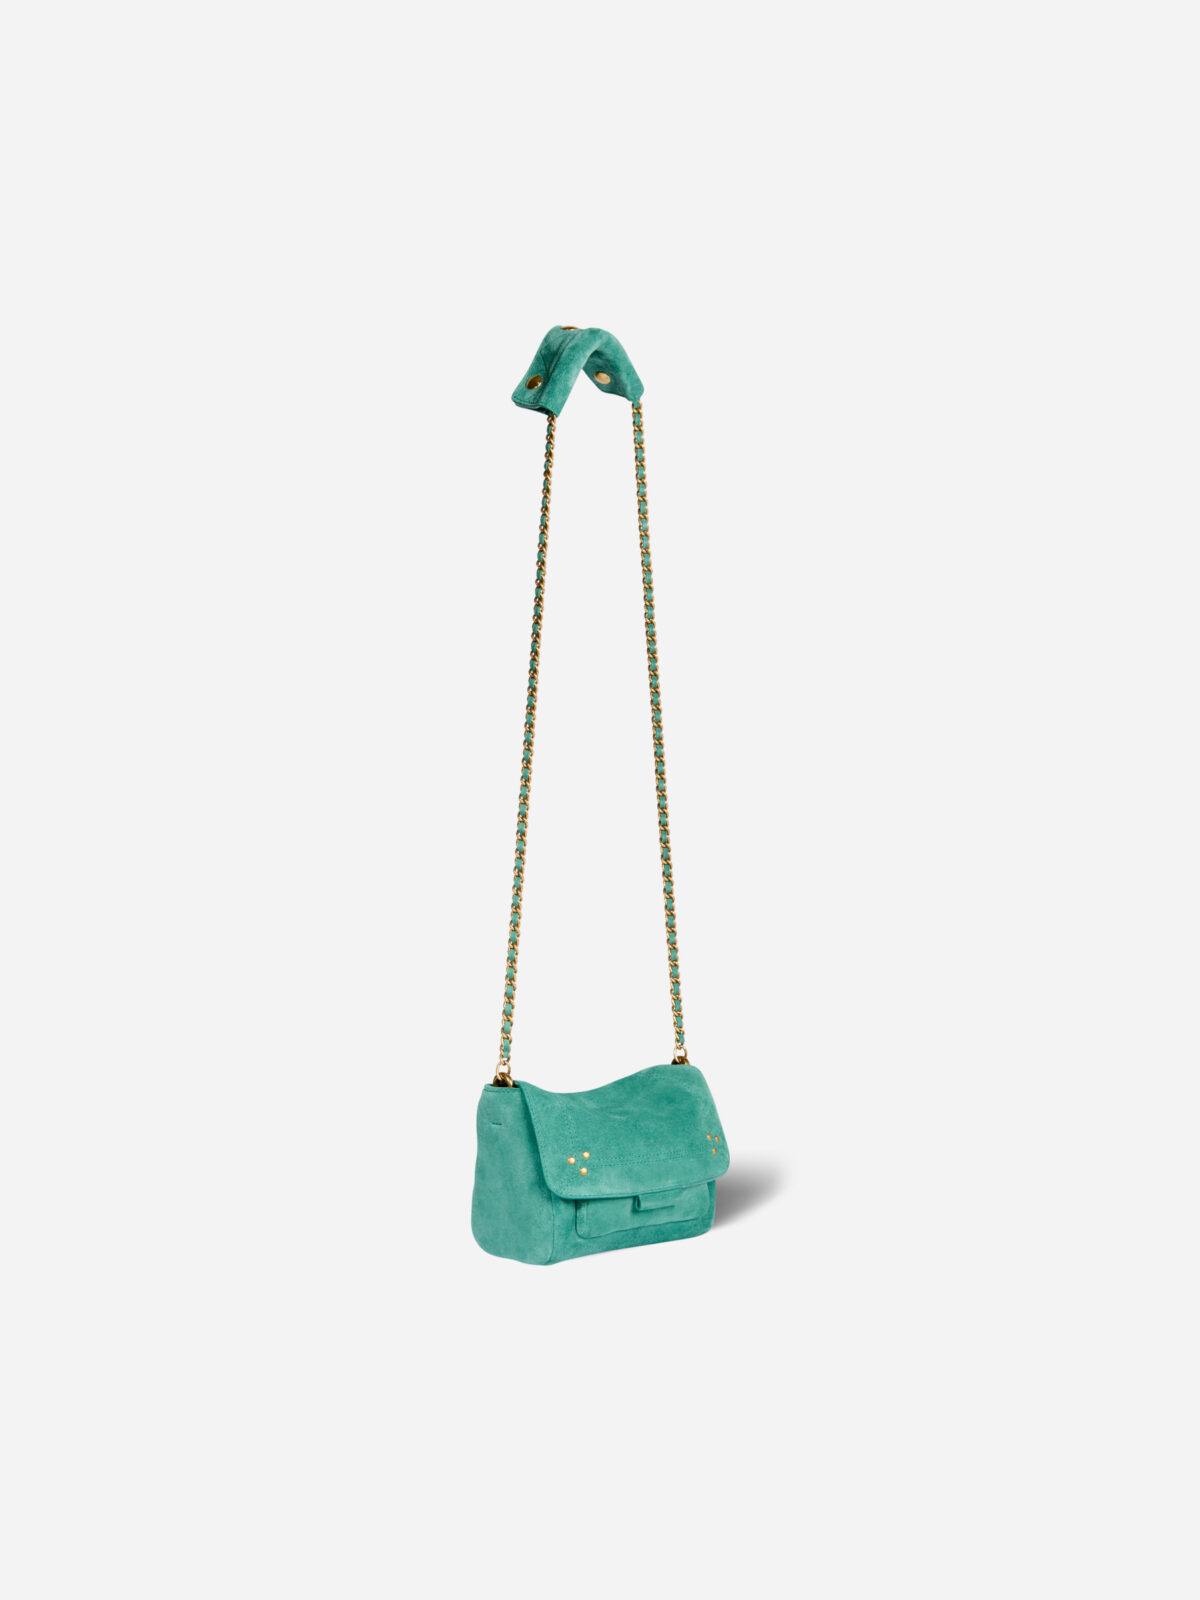 43LULUSCR_Cactus_suede-green-leather-small-flap-bag-jerome-dreyfuss-matchboxathens